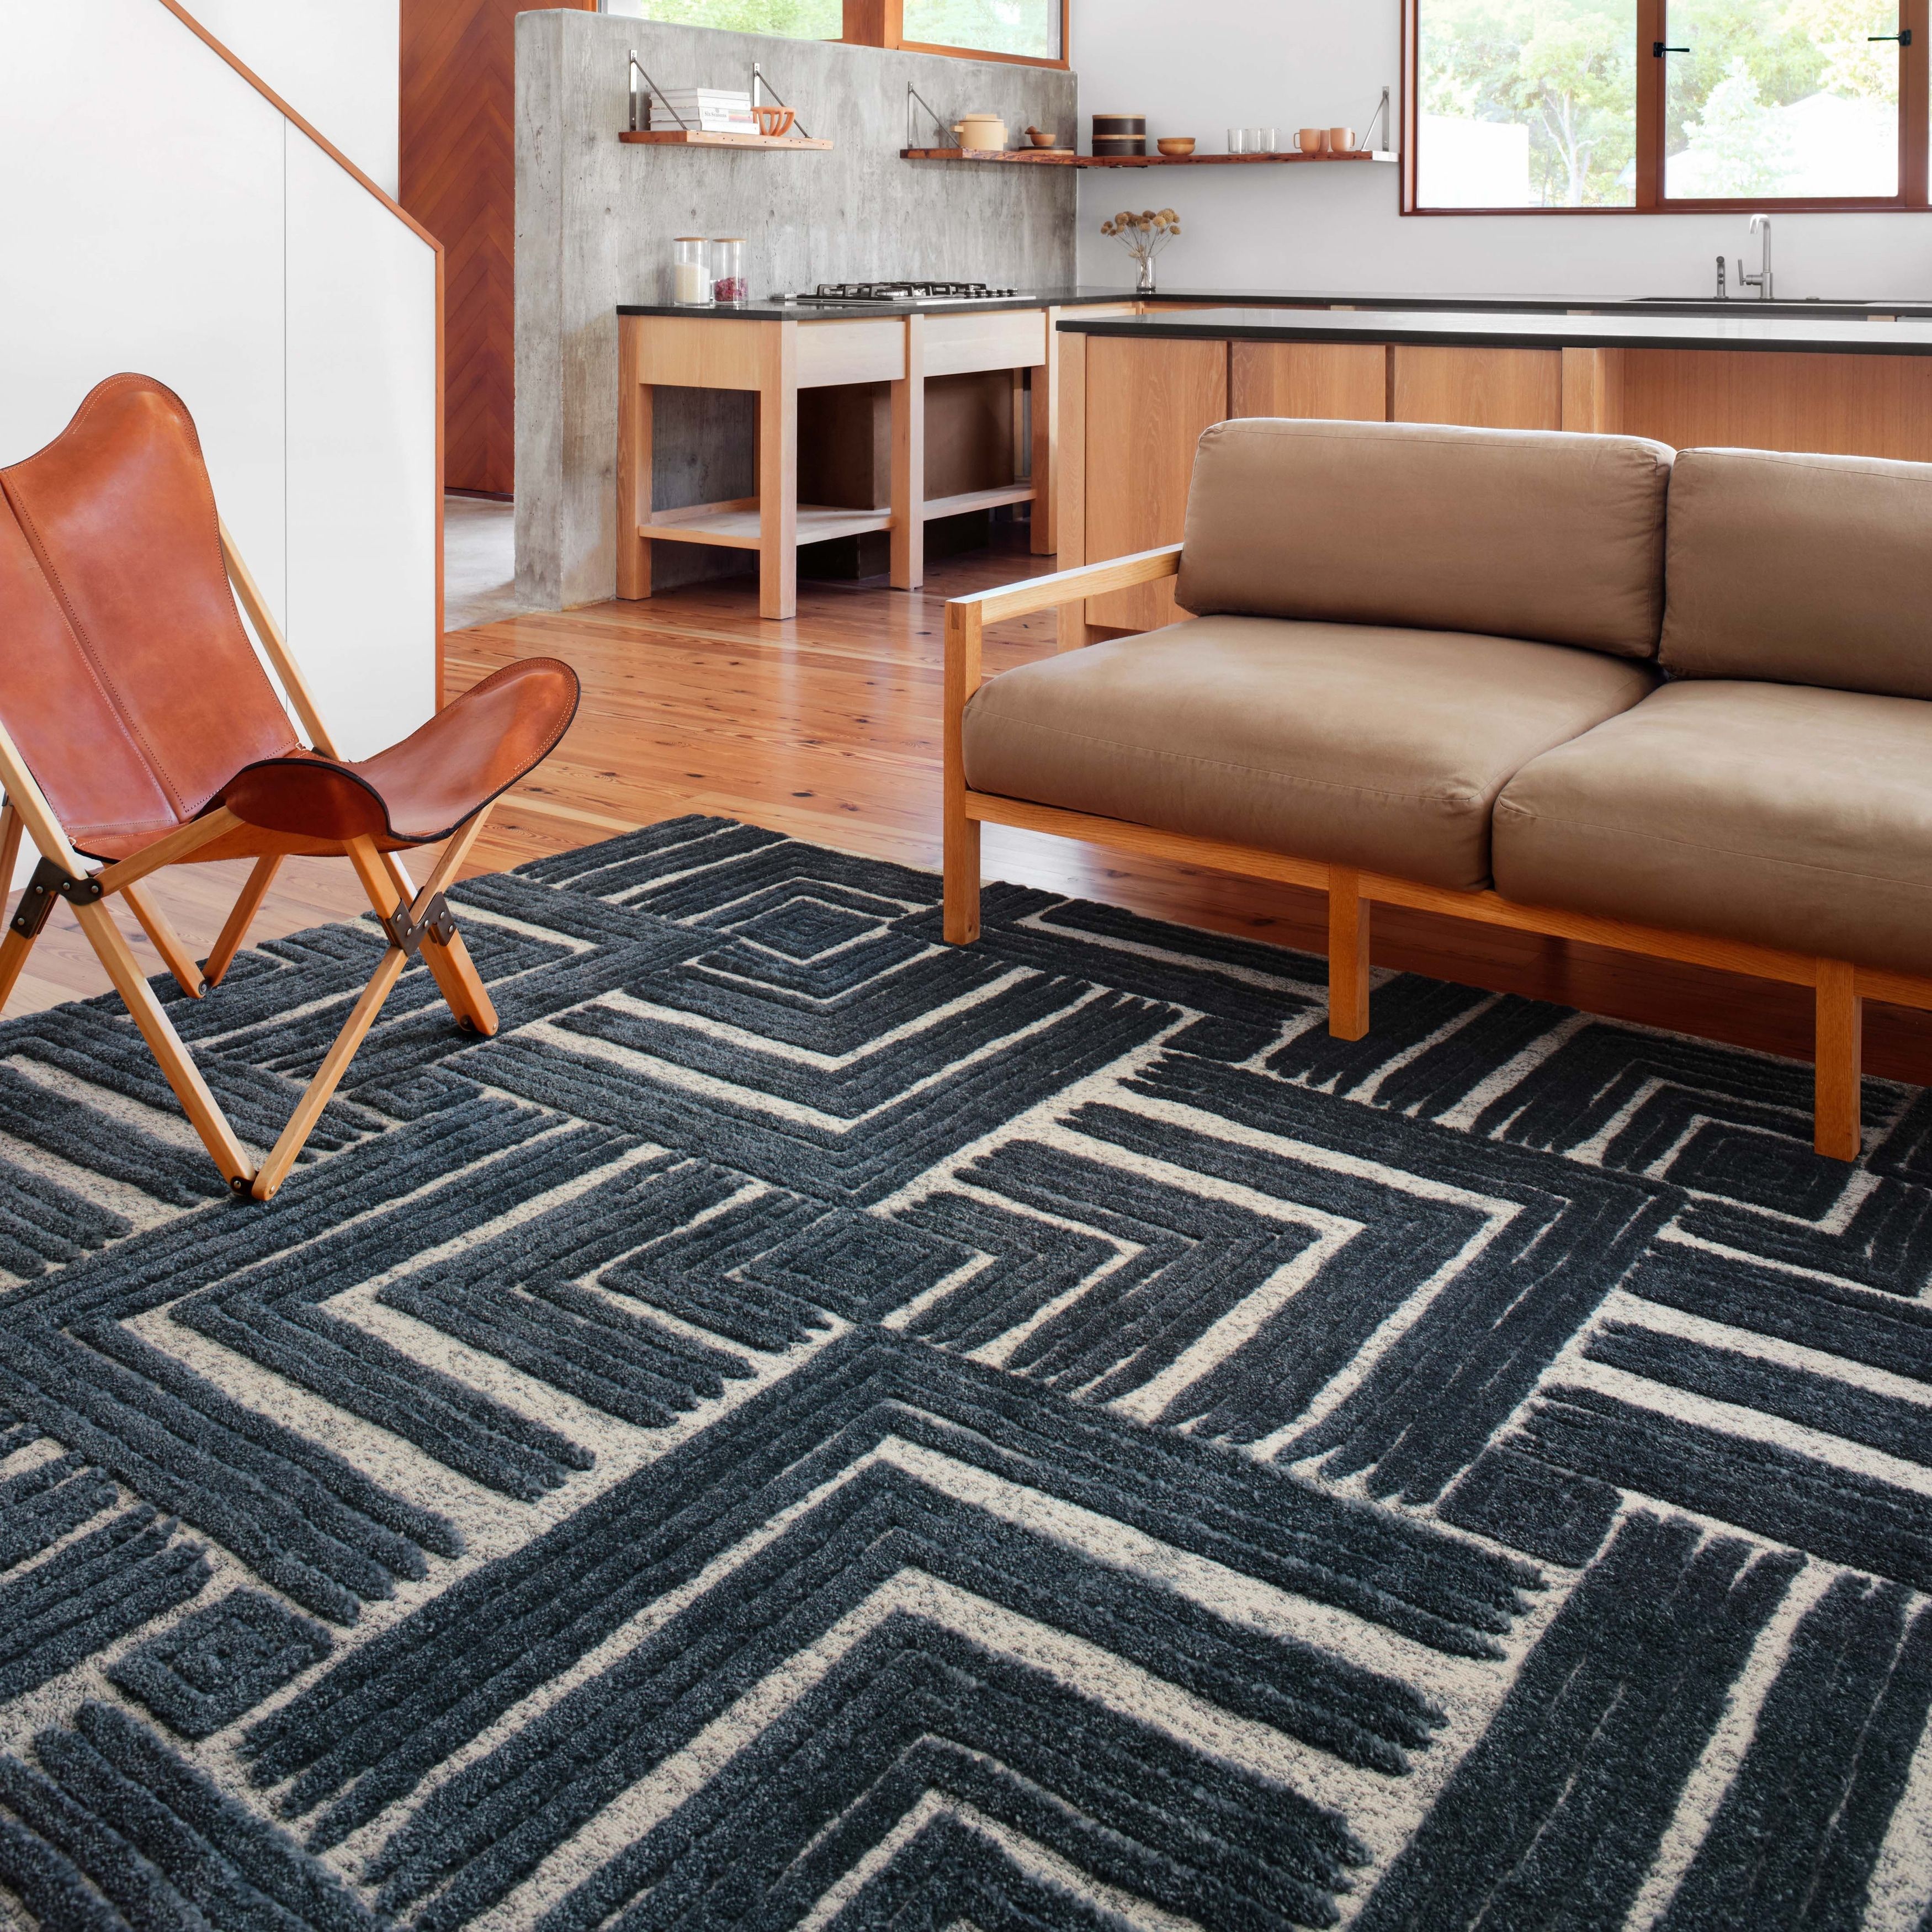 Alexander Home Vail Mid Century Modern Geometric Square Area Rug – On Sale  – Overstock – 31663956 With Square Rugs (View 5 of 15)